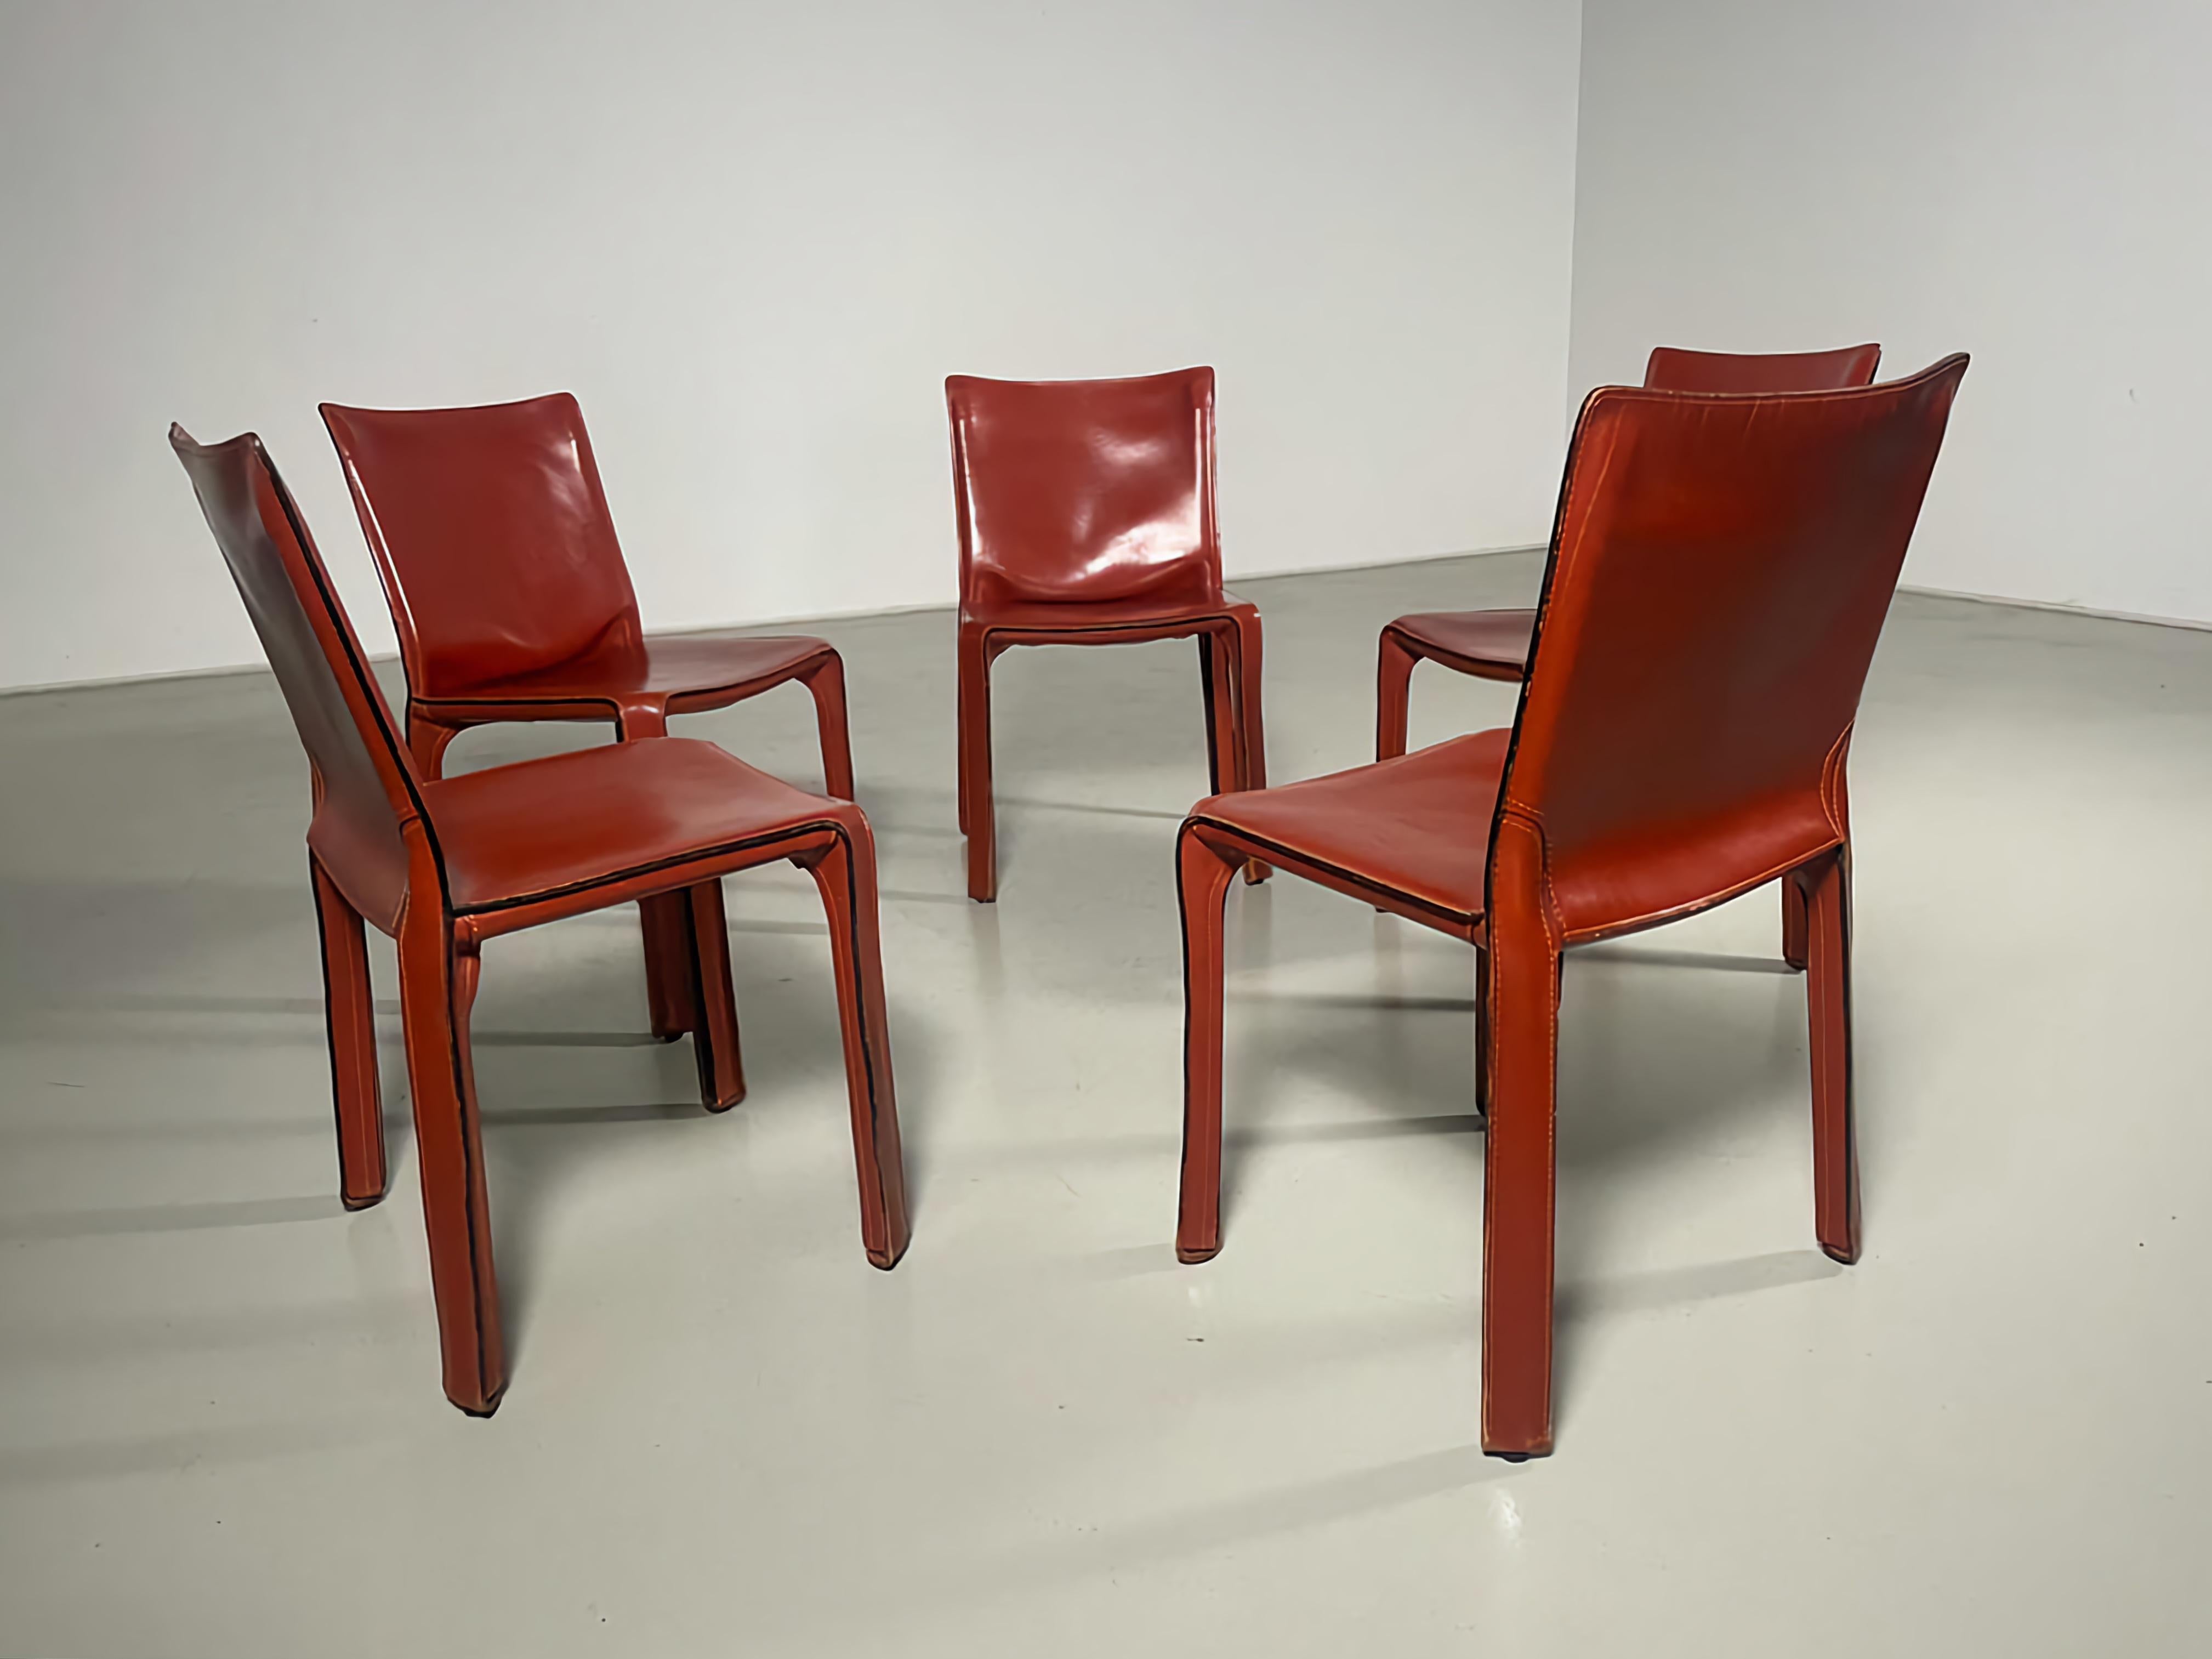 Cassina CAB 412 chairs, Mario Bellini, Cassina, 1980s.

Set of 5 Taxi-412 dining room chairs in saddle leather. Designed by Mario Bellini and manufactured by Cassina in the 1980s in Italy. The leather cover is stretched over a minimal tubular steel